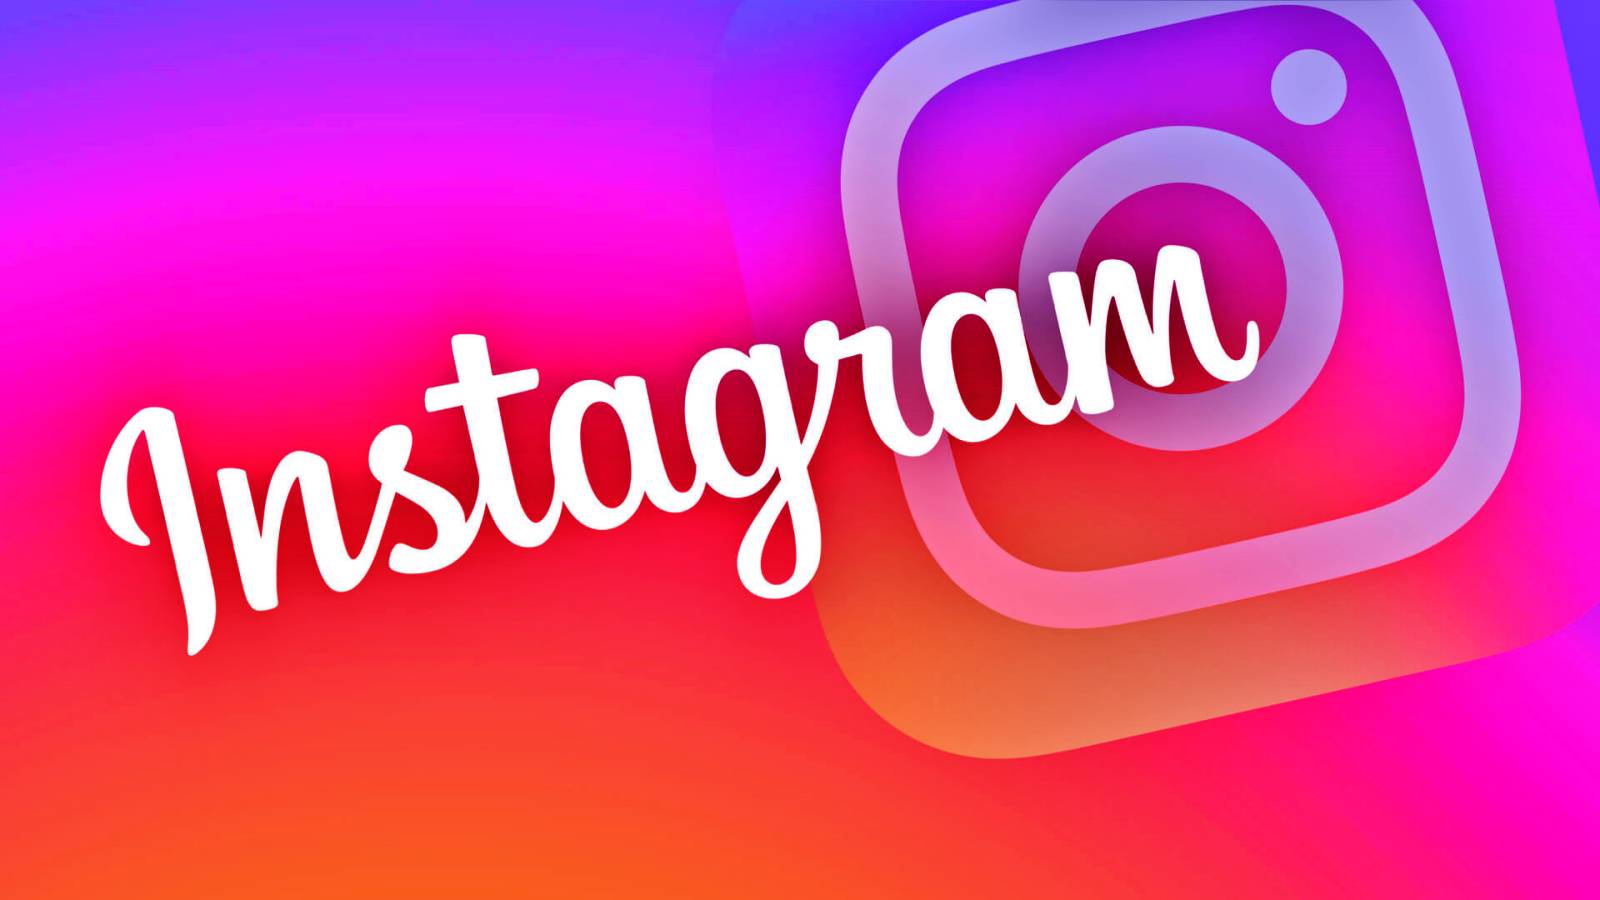 Instagram Update Brings News for Phones, Here Are the Changes